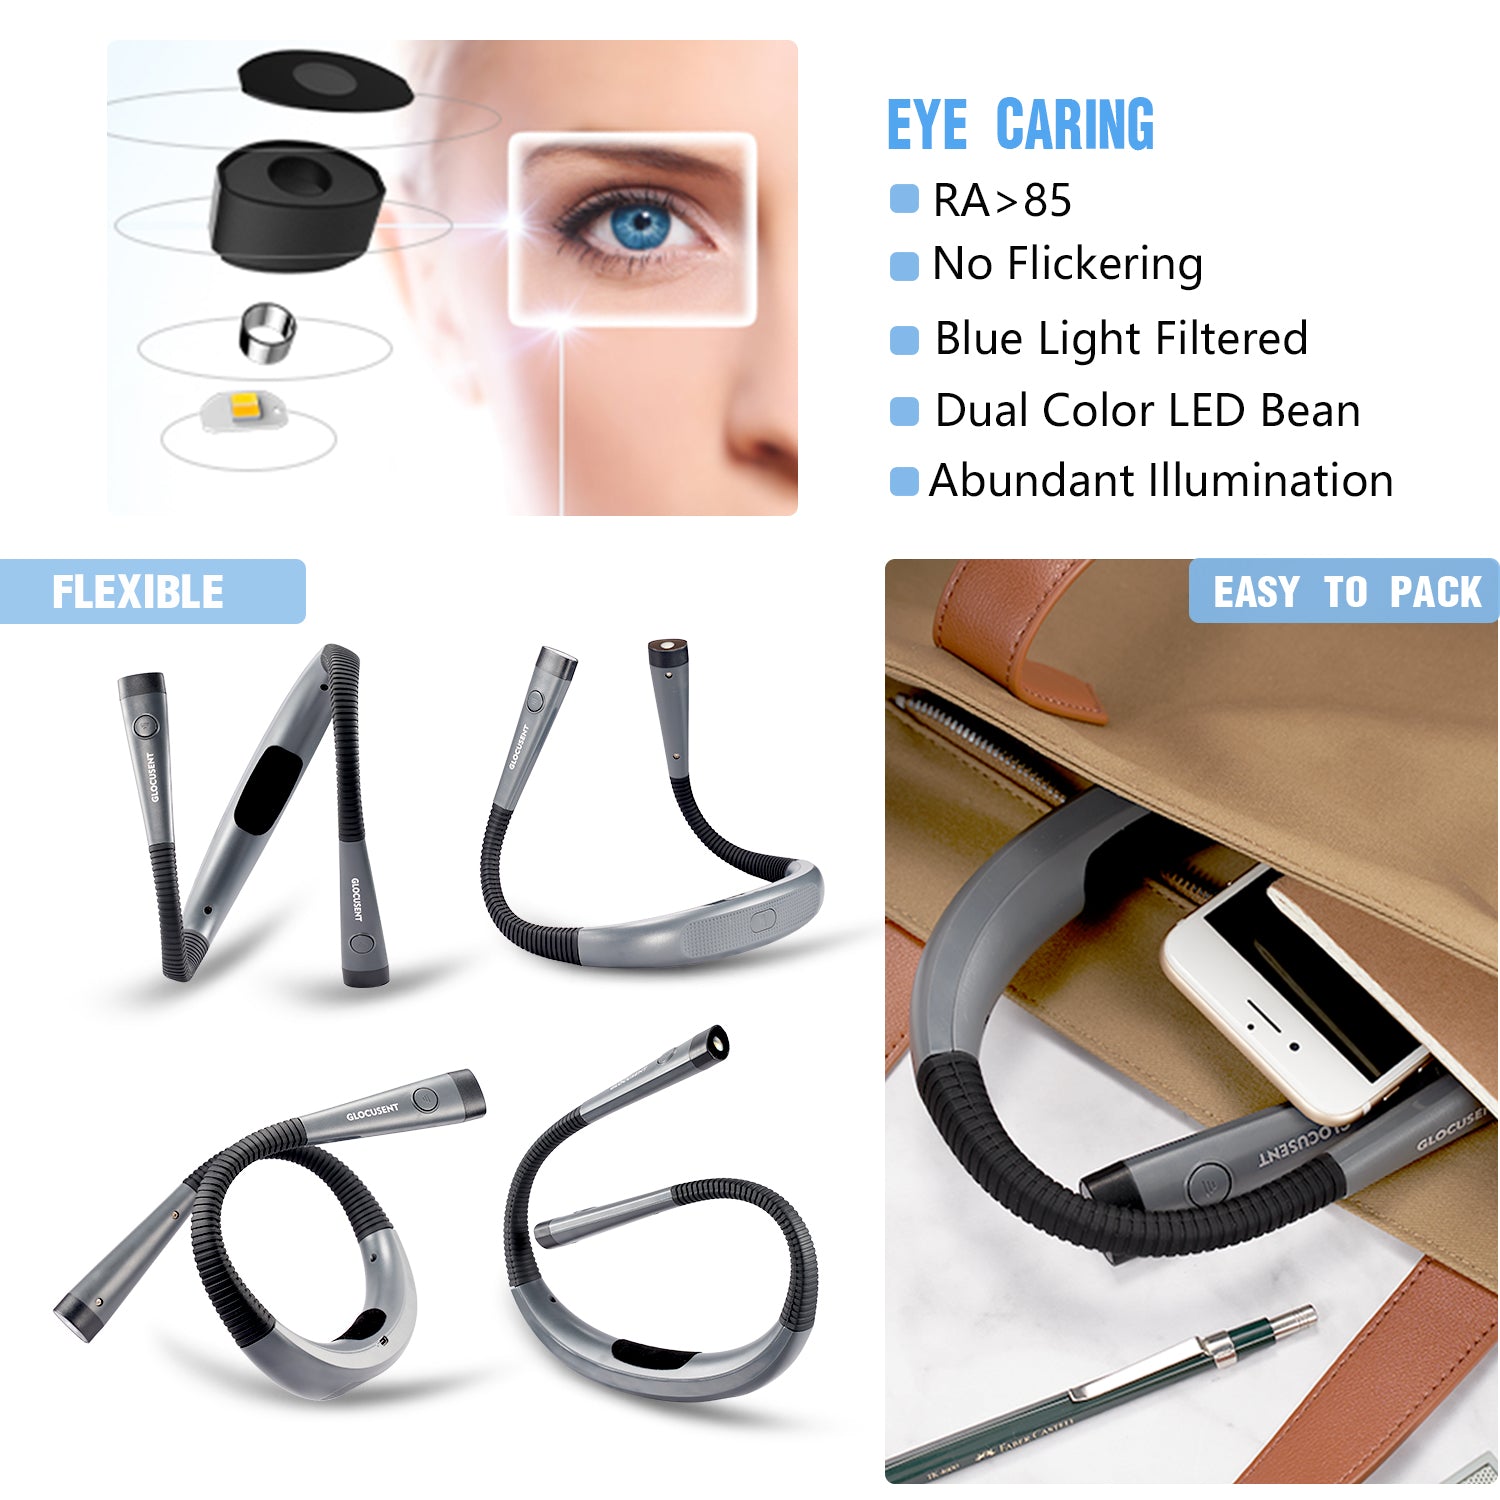 best flexible and eye caring neck light